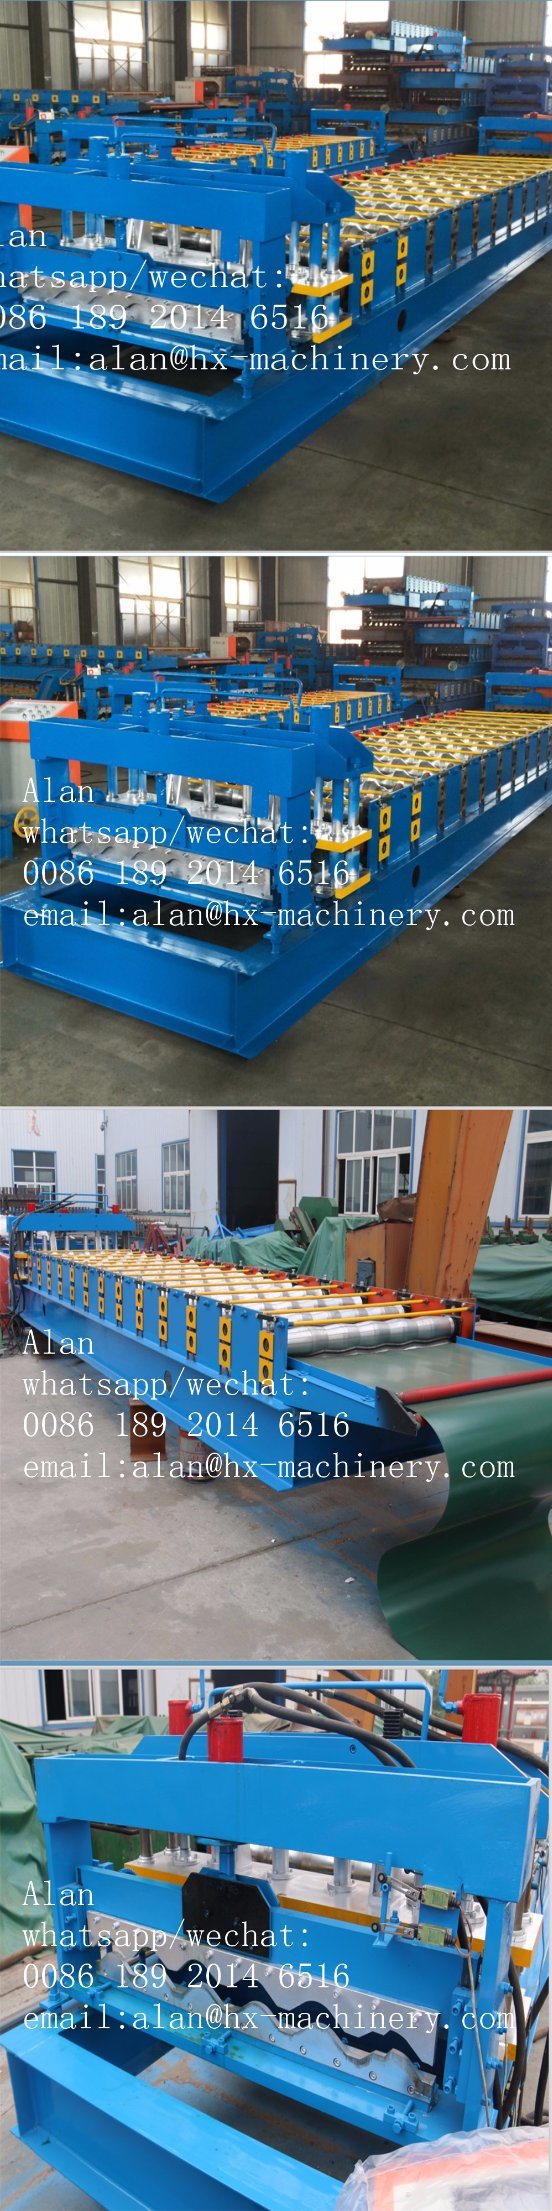 Glazed Tile Roofing Sheet Roll Forming Machine